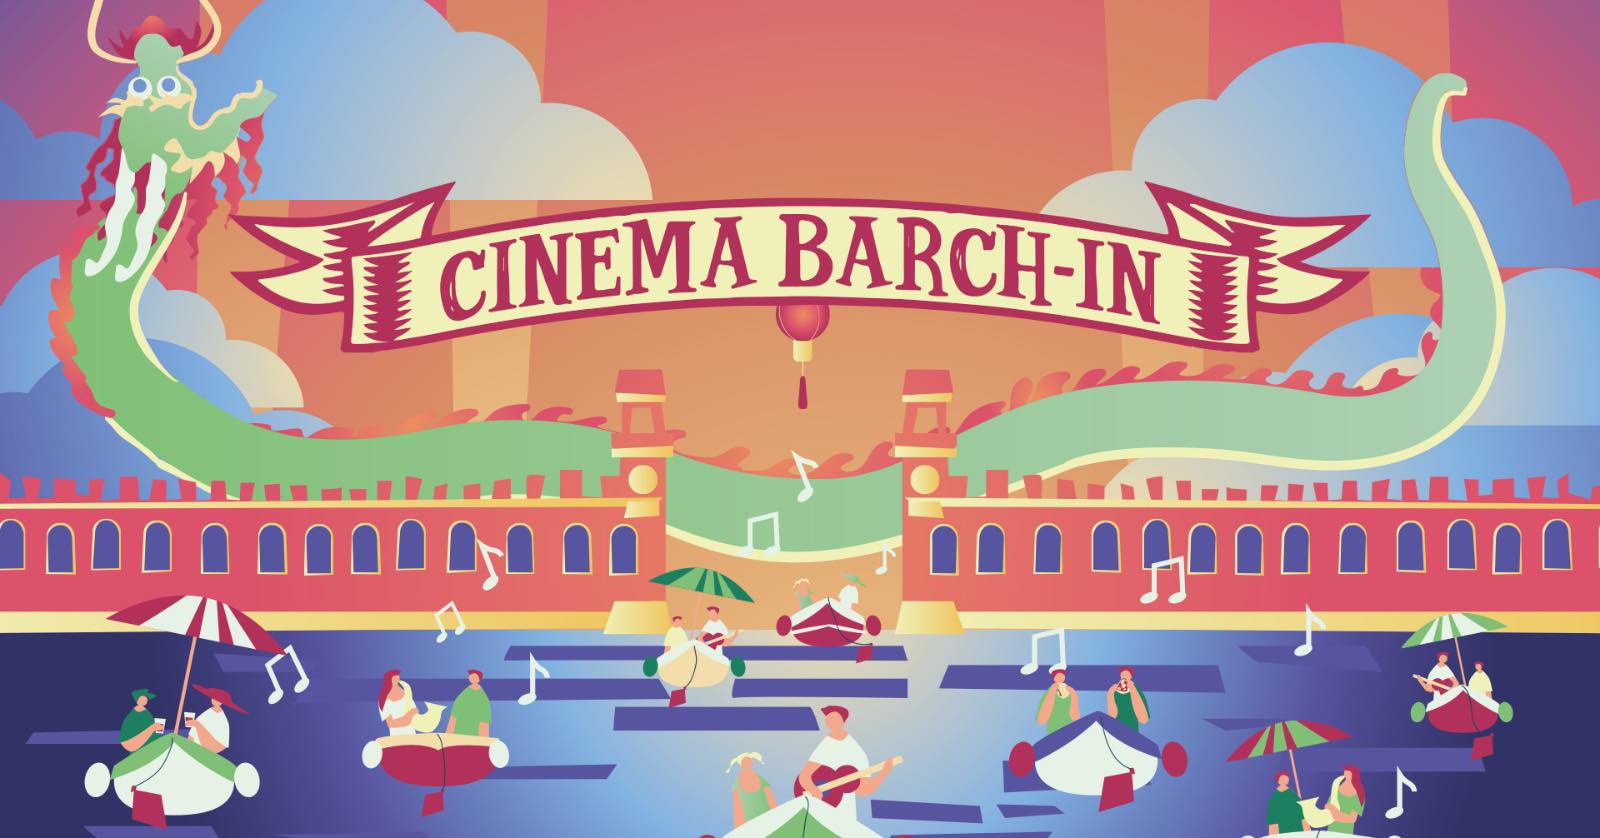 Cinema Barch-in